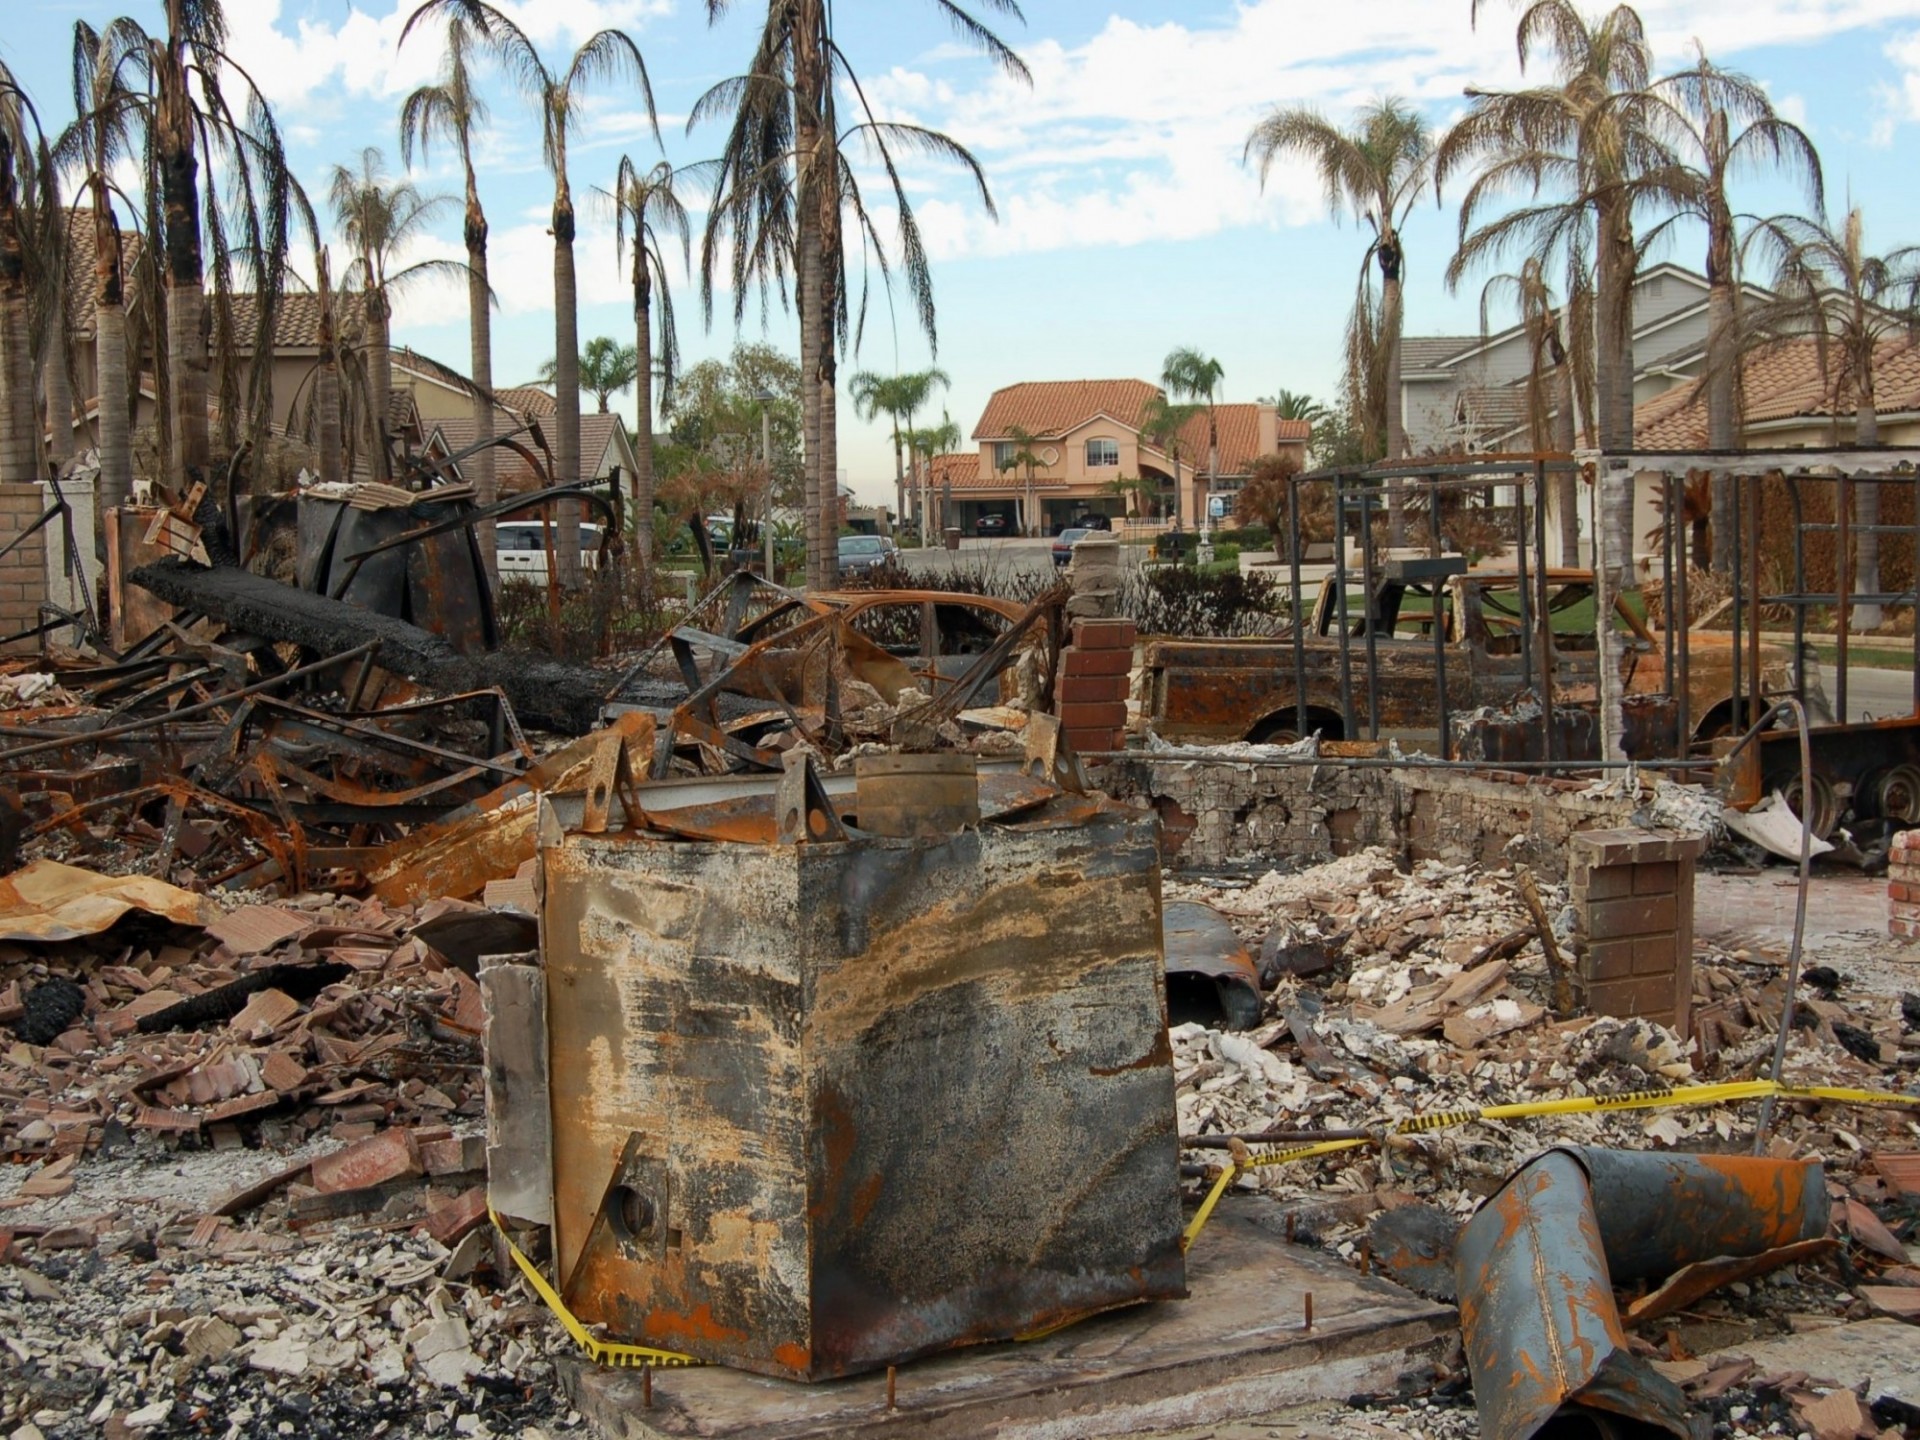 Wildfire destroyed homes in Yorba Linda, CA in 2008. Credit: Michael Mancino